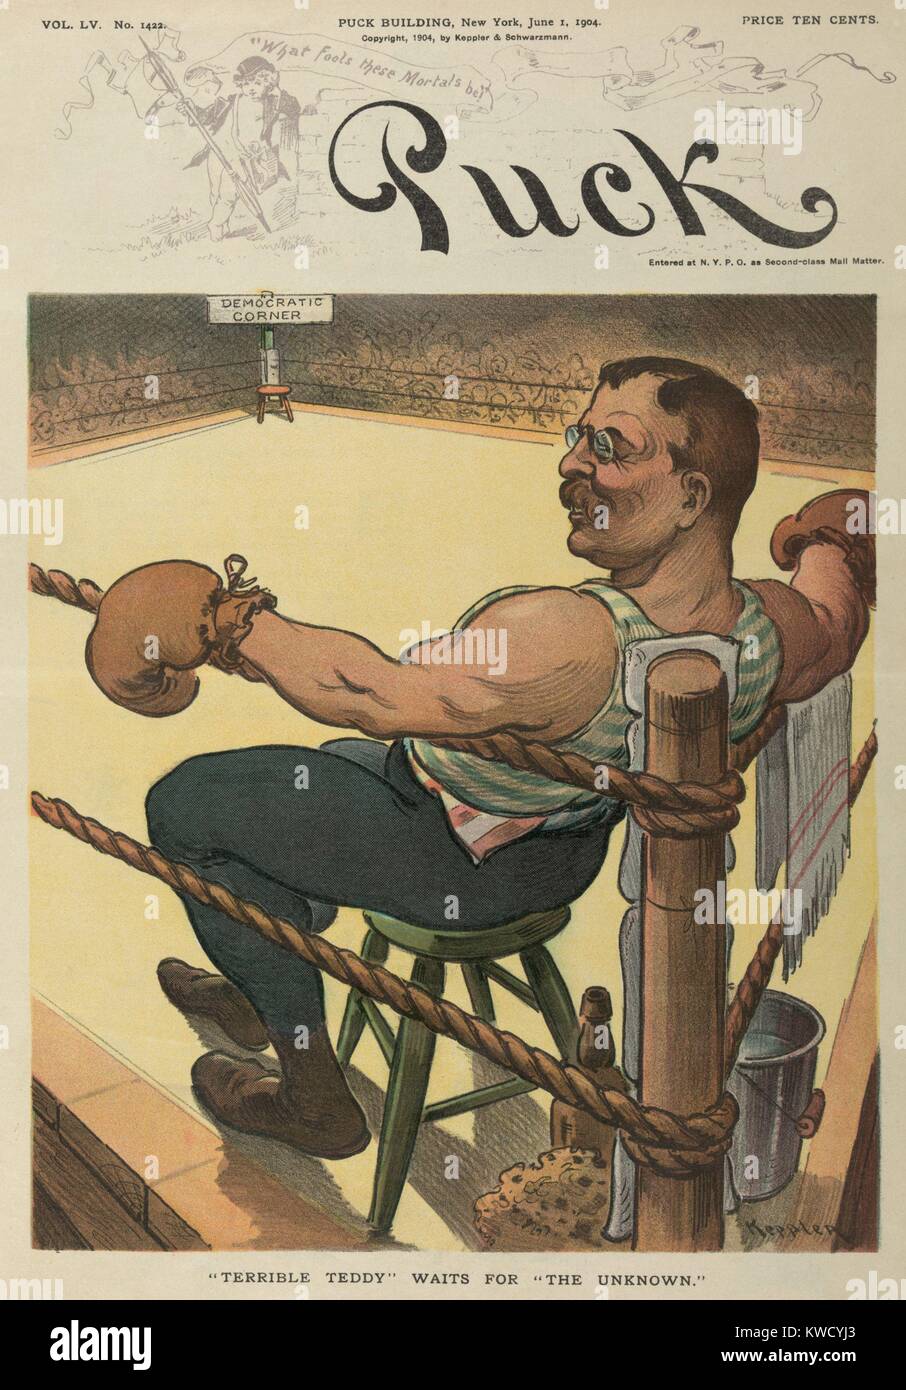 TERRIBLE TEDDY WAITS FOR THE UNKNOWN, cartoon in PUCK Magazine, June 1, 1904. Republican President Theodore Roosevelt as a boxer, waiting for his Democratic opponent in the 1904 election (BSLOC 2017 6 23) Stock Photo